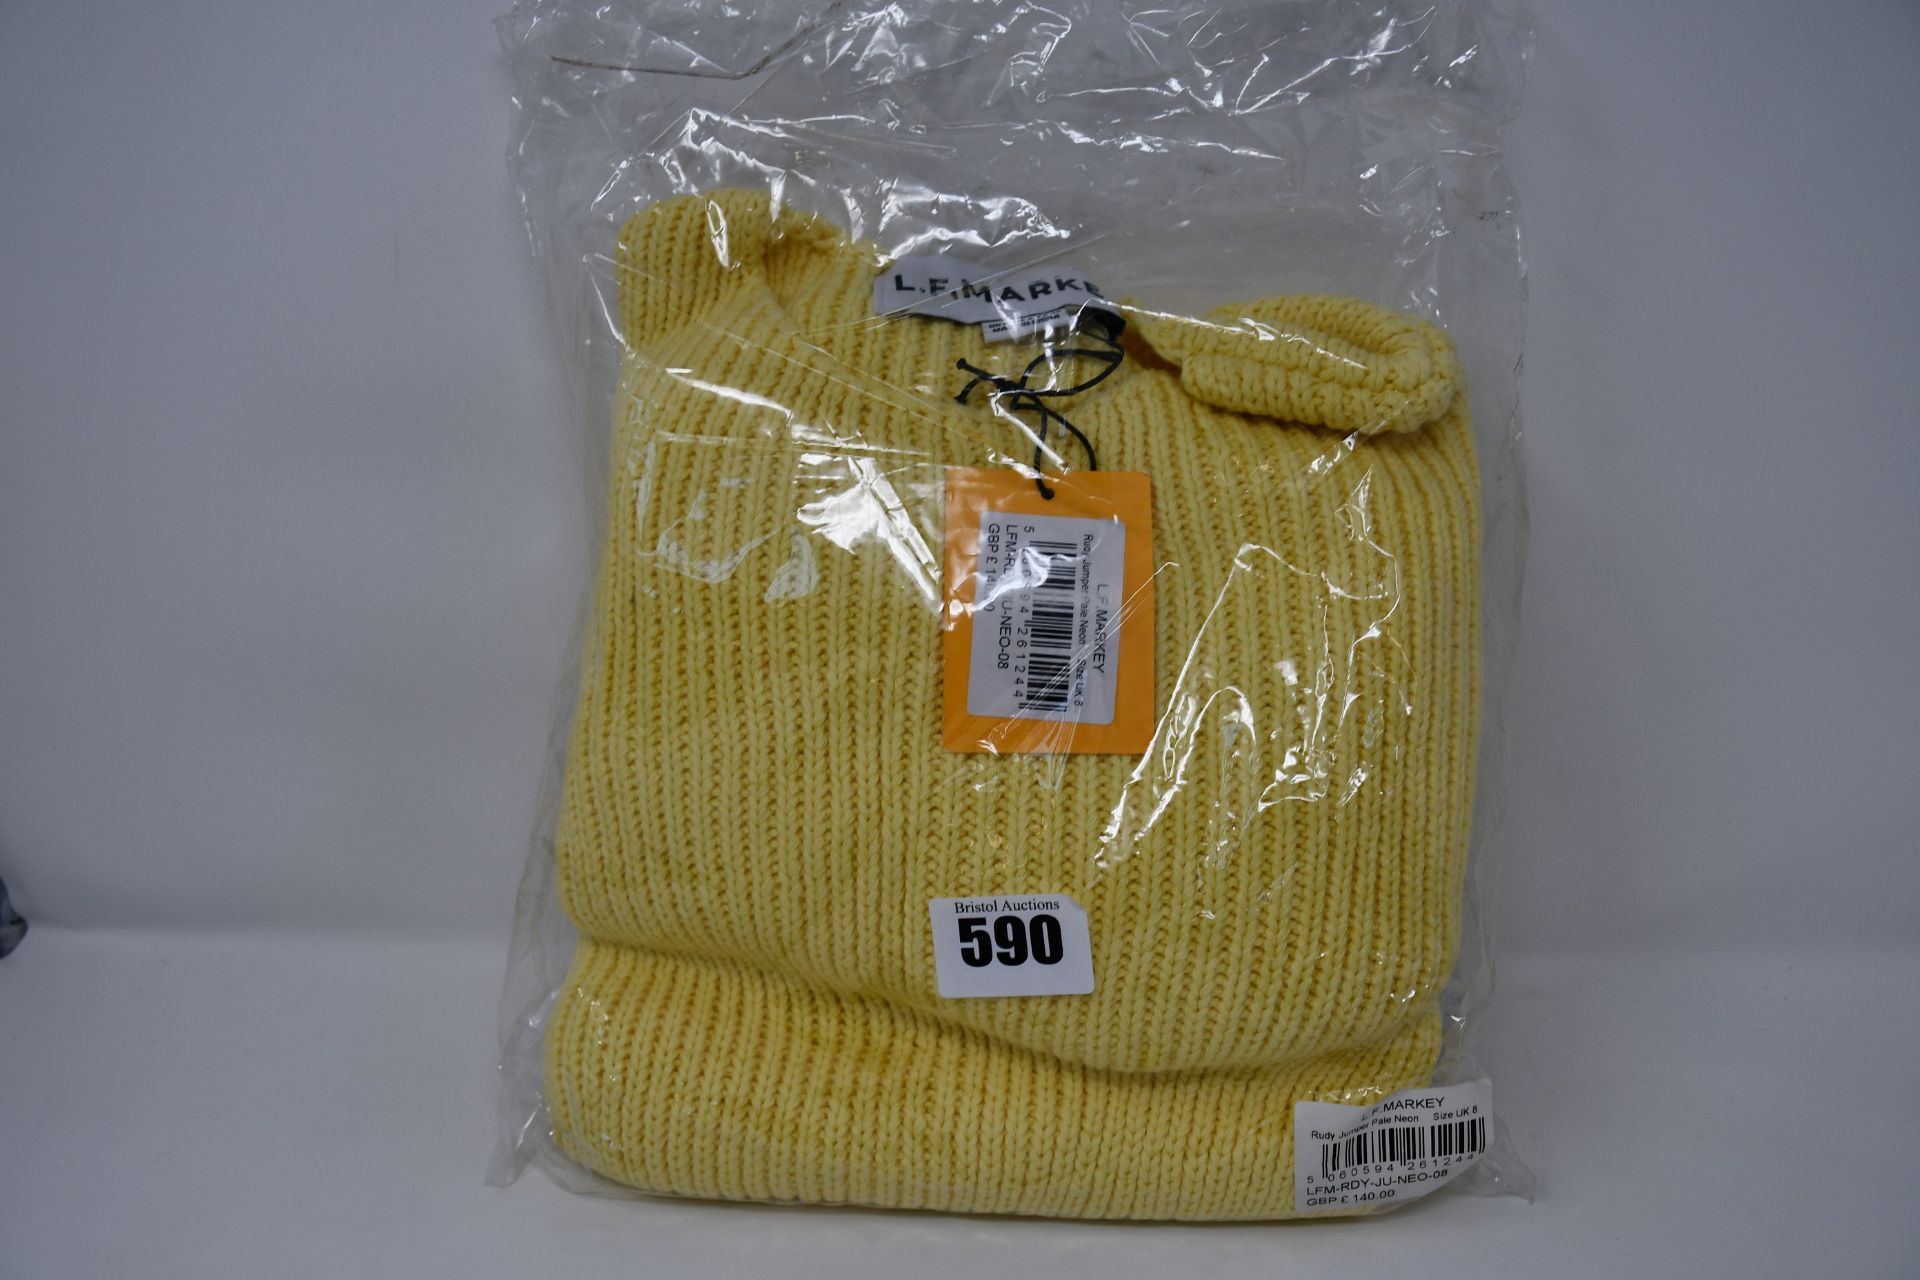 Two as new L.F.Markey Rudy jumpers in lemon (UK 8 and 10).